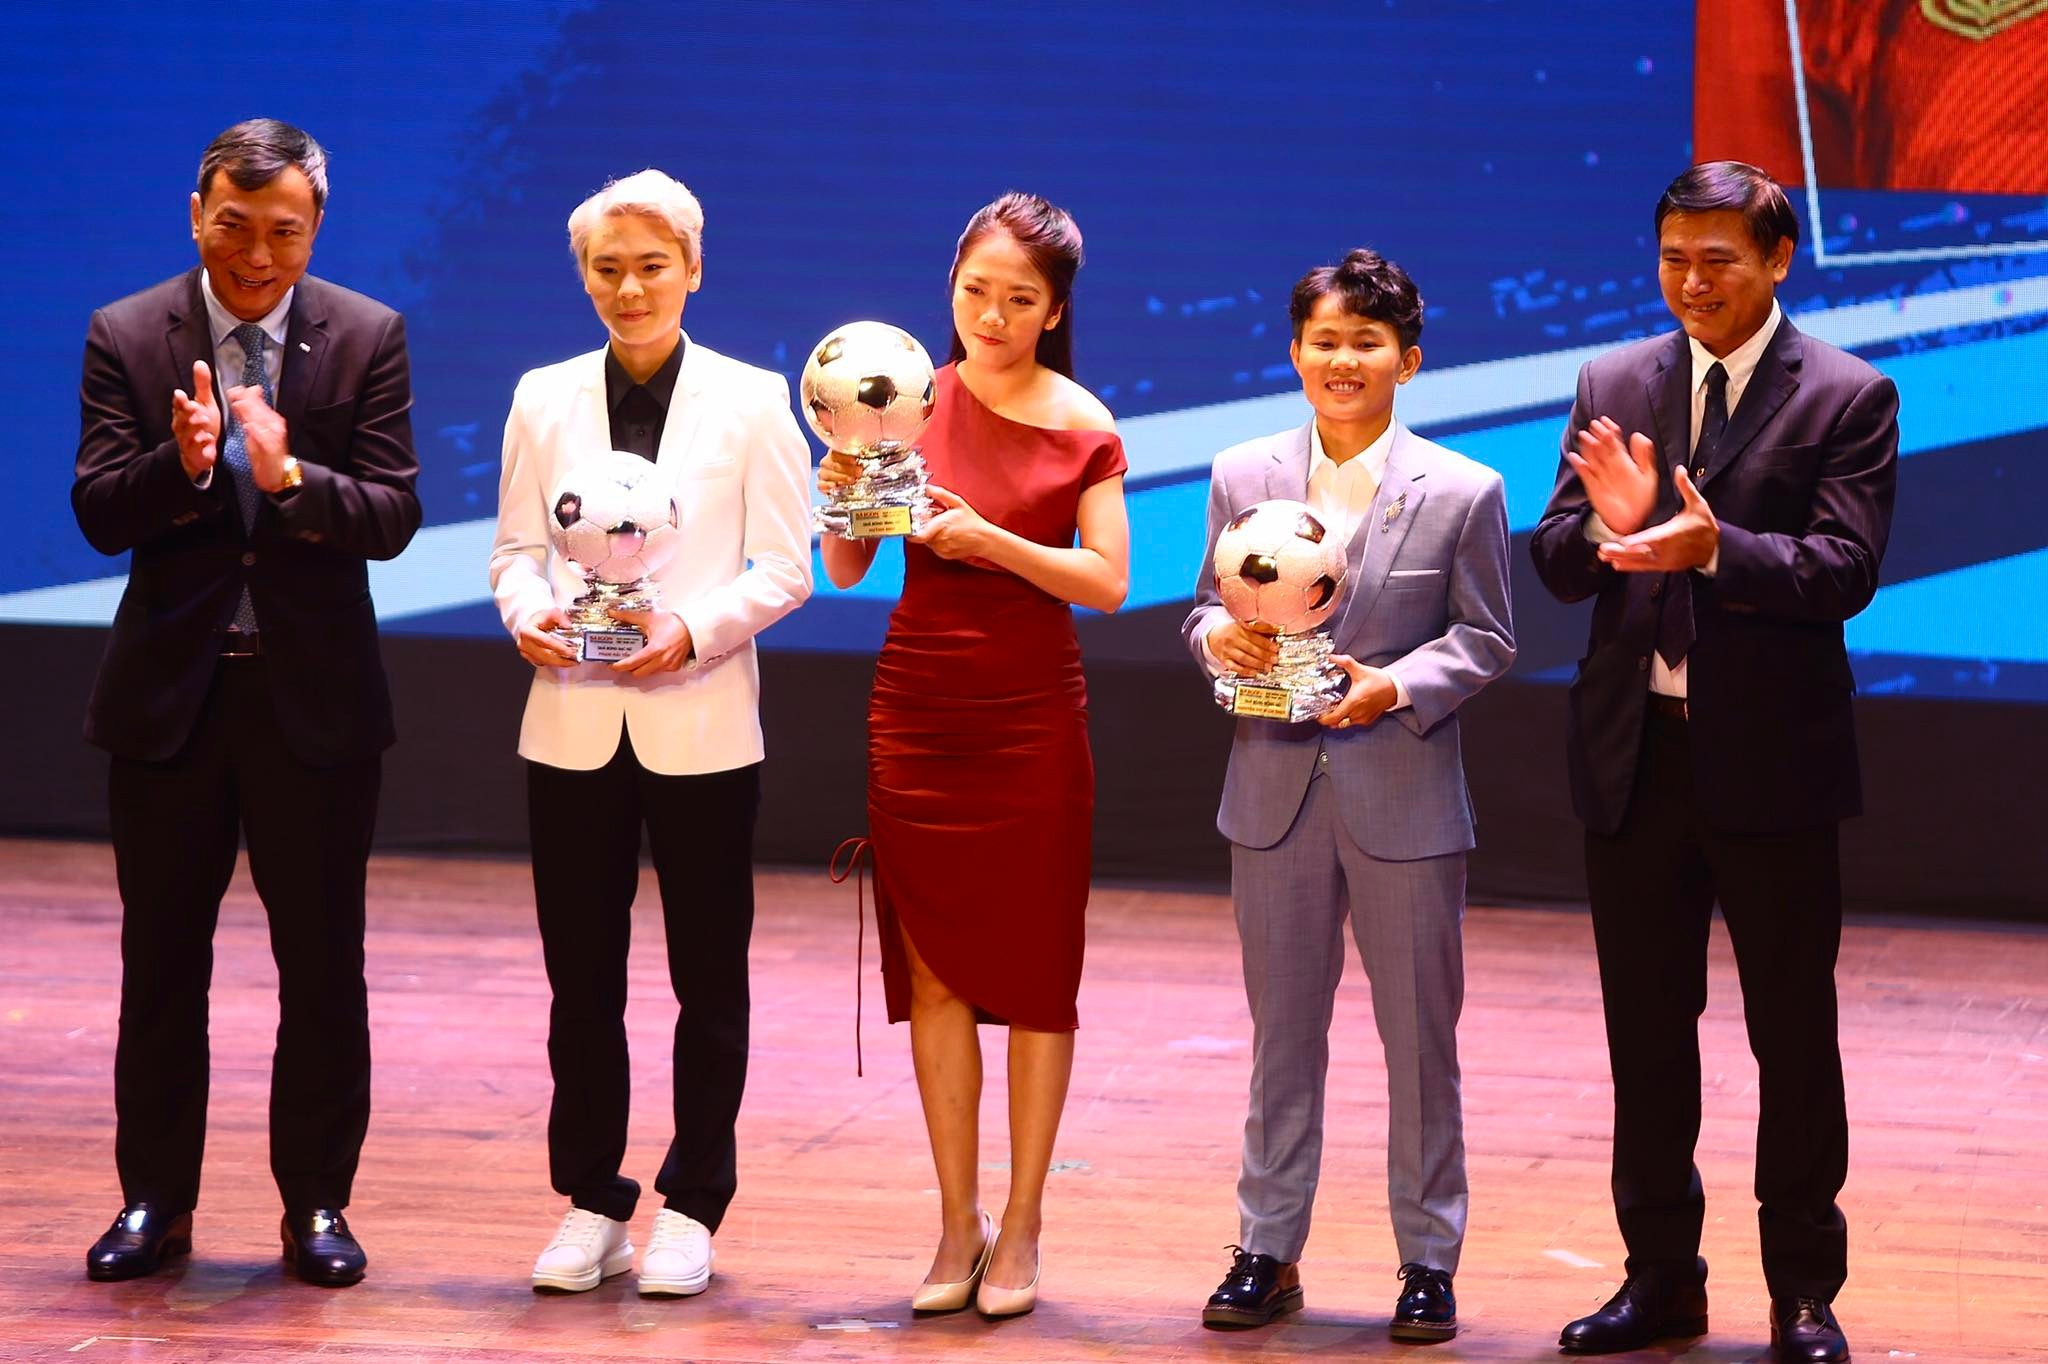 Cu Thi Huynh Nhu (center), Pham Hai Yen (second left) and Nguyen Thi Bich Thuy (second right) win the women’s football Golden, Silver and Bronze Ball awards, respectively, at a ceremony in Ho Chi Minh City, February 16, 2022. Photo: H. Tung / Tuoi Tre